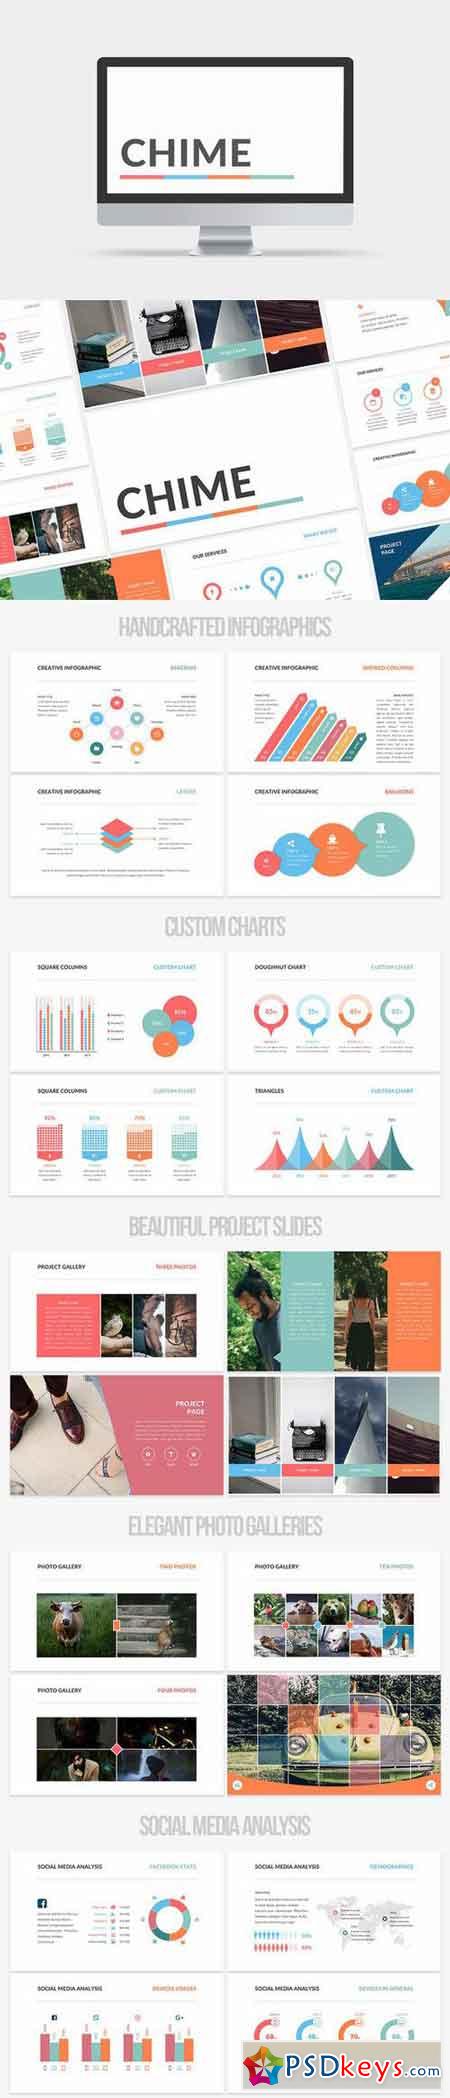 Chime PowerPoint Template 771226